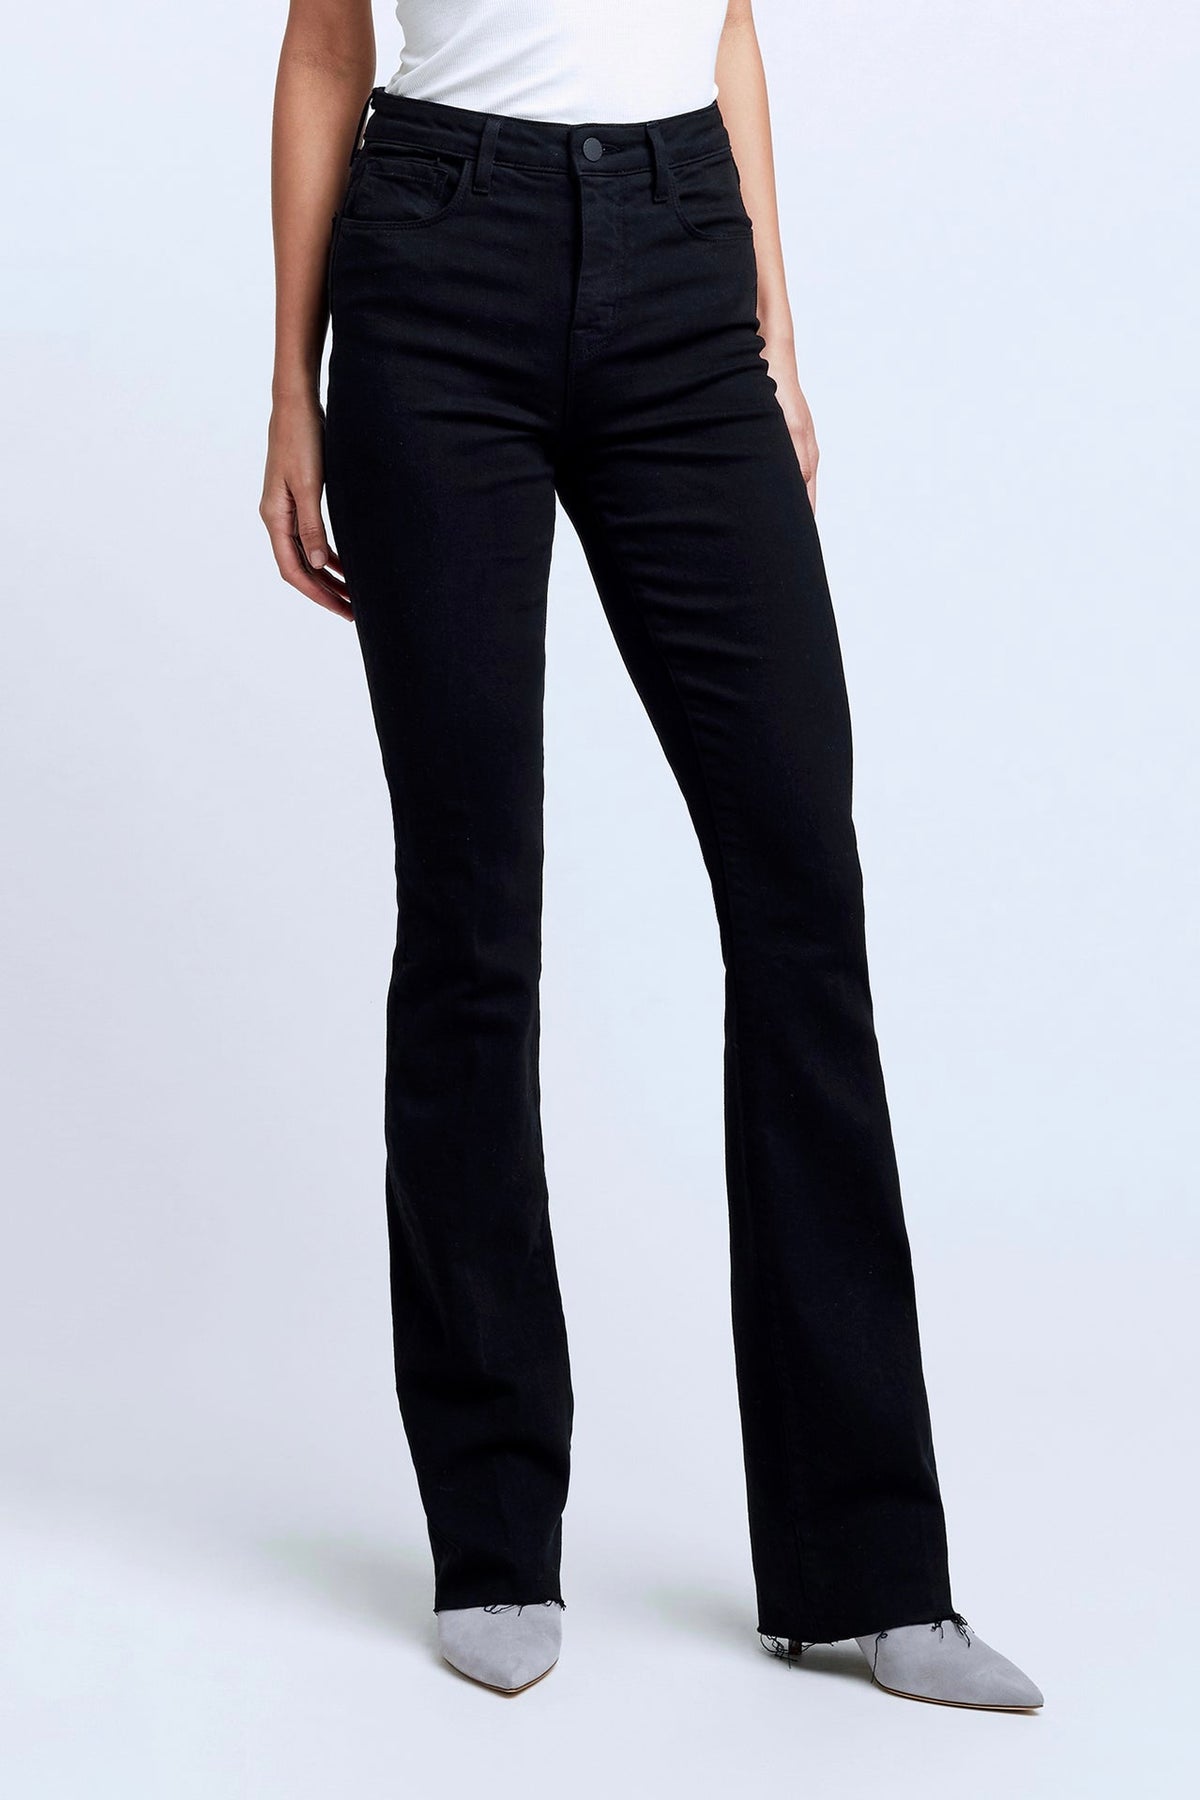 L'Agence Ruth High Rise Jeans